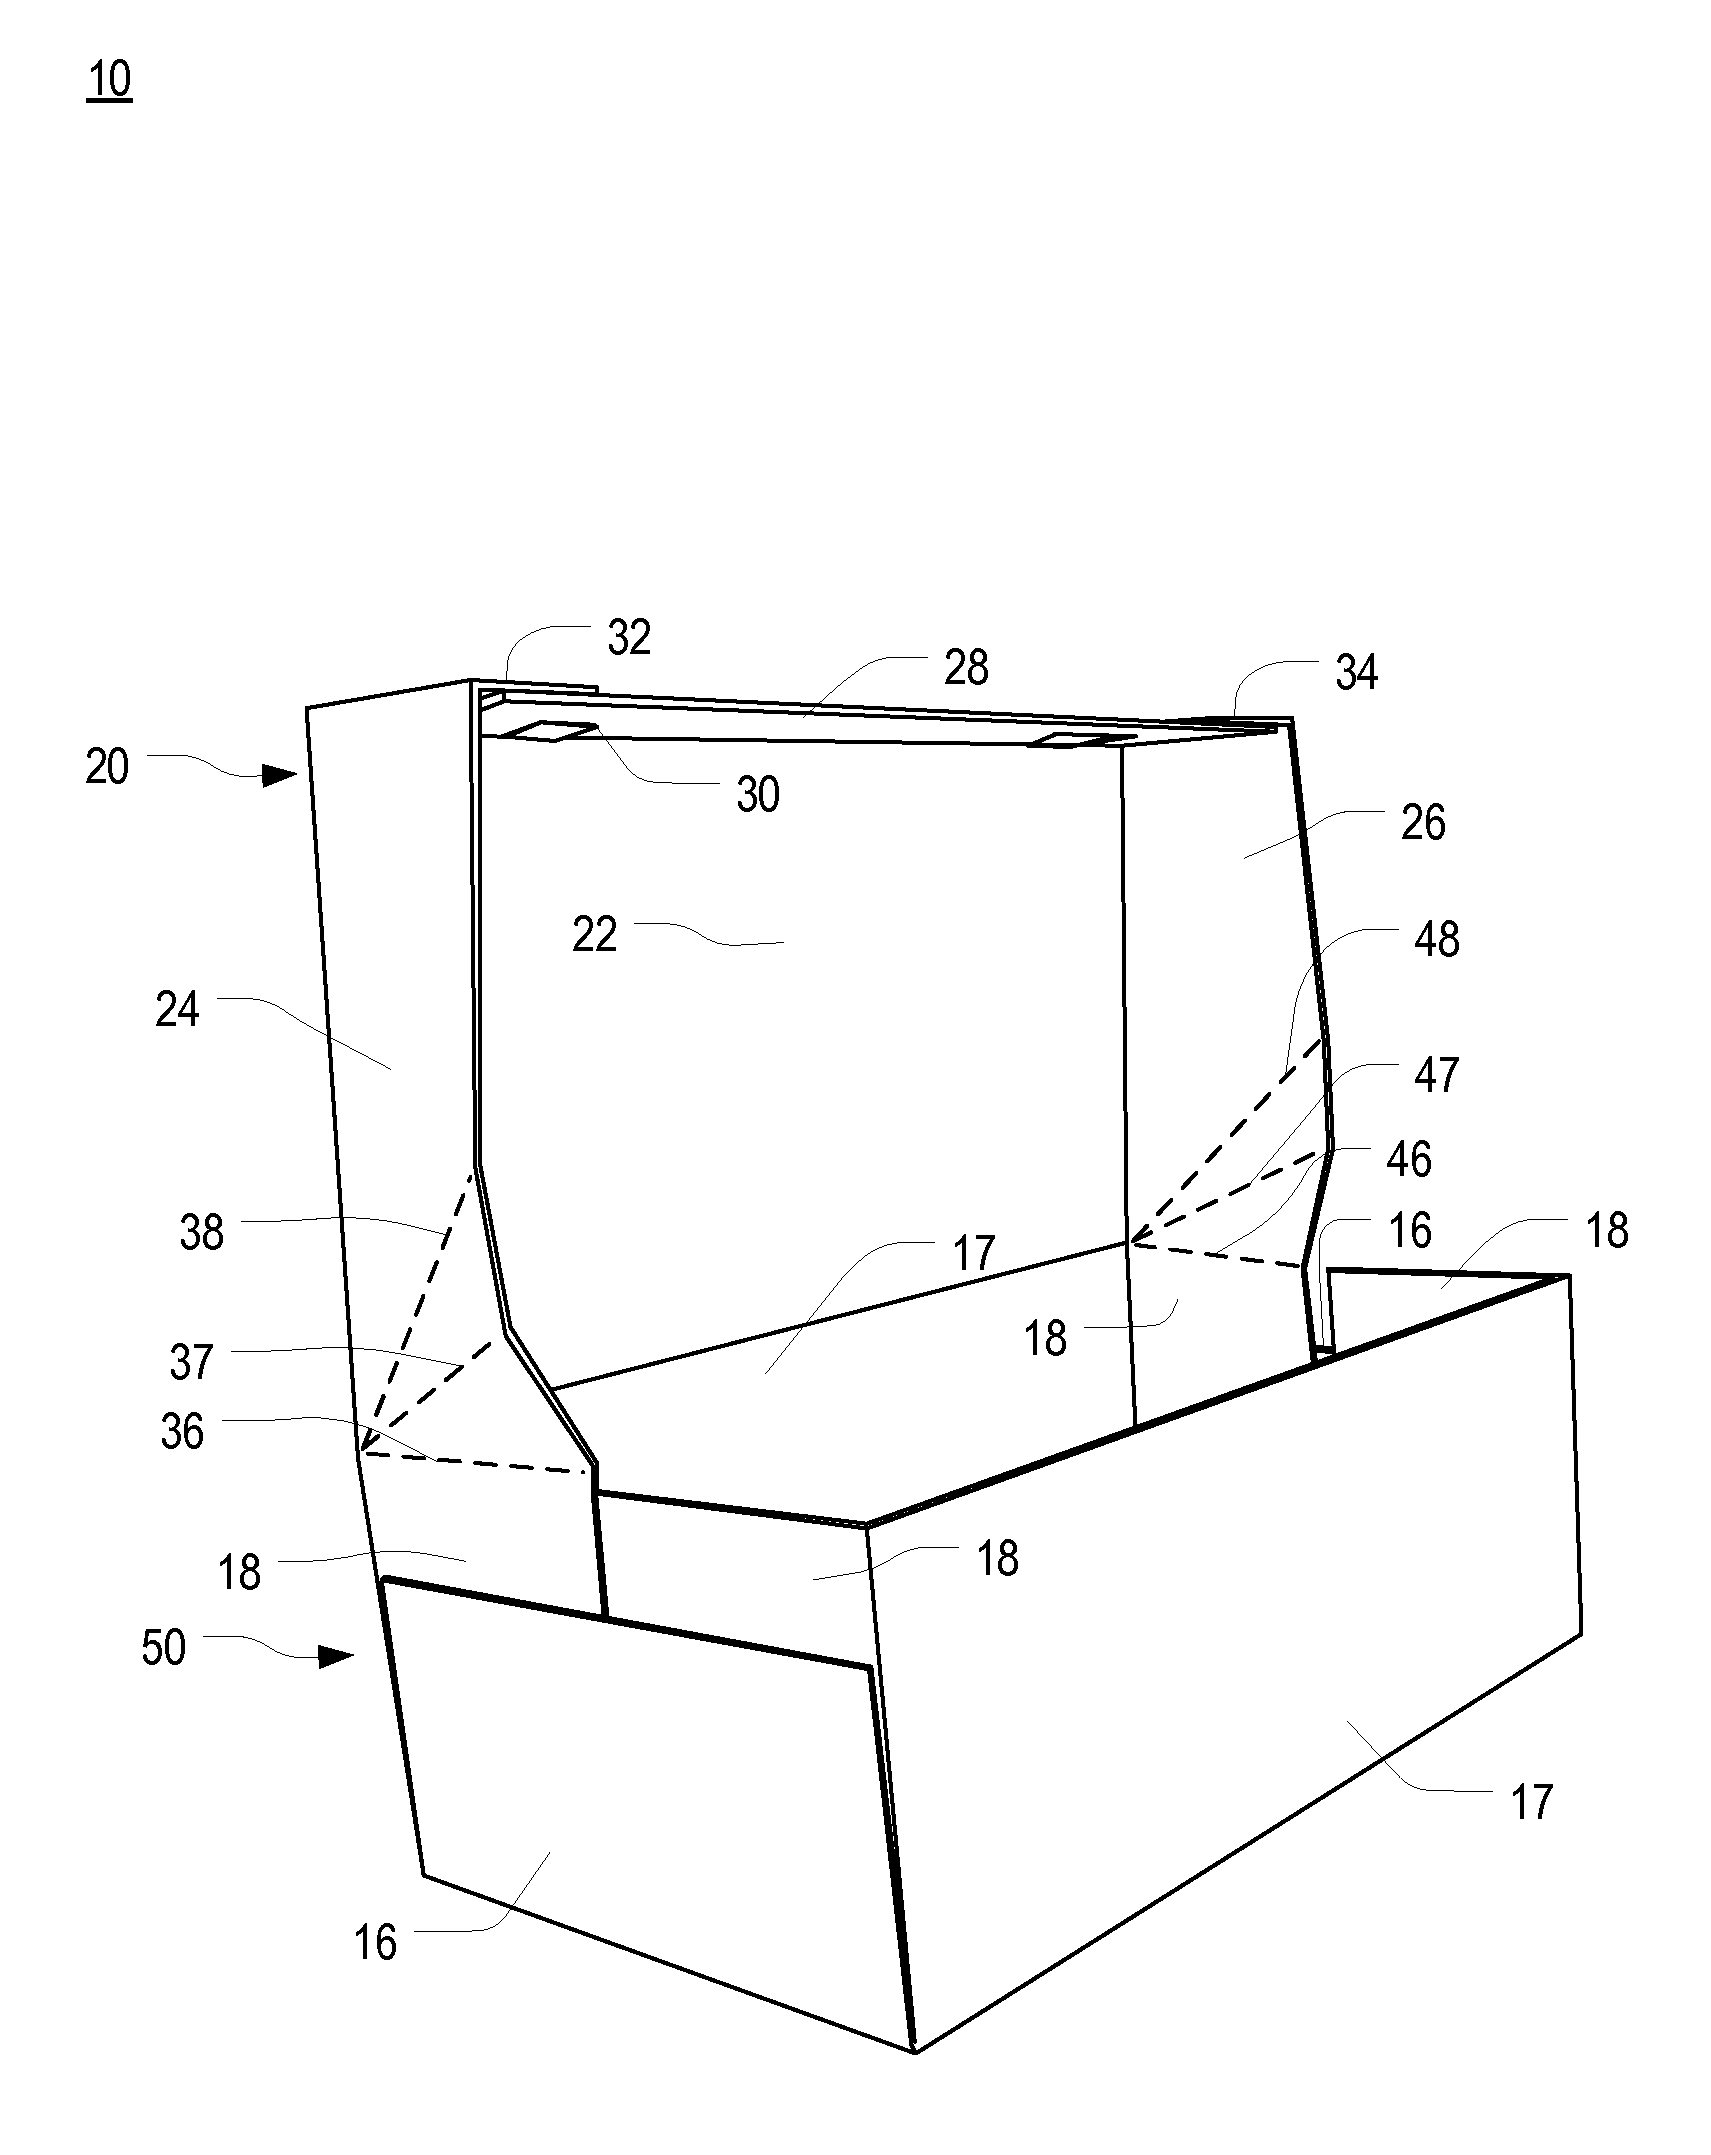 One-piece box with integrally connected lid